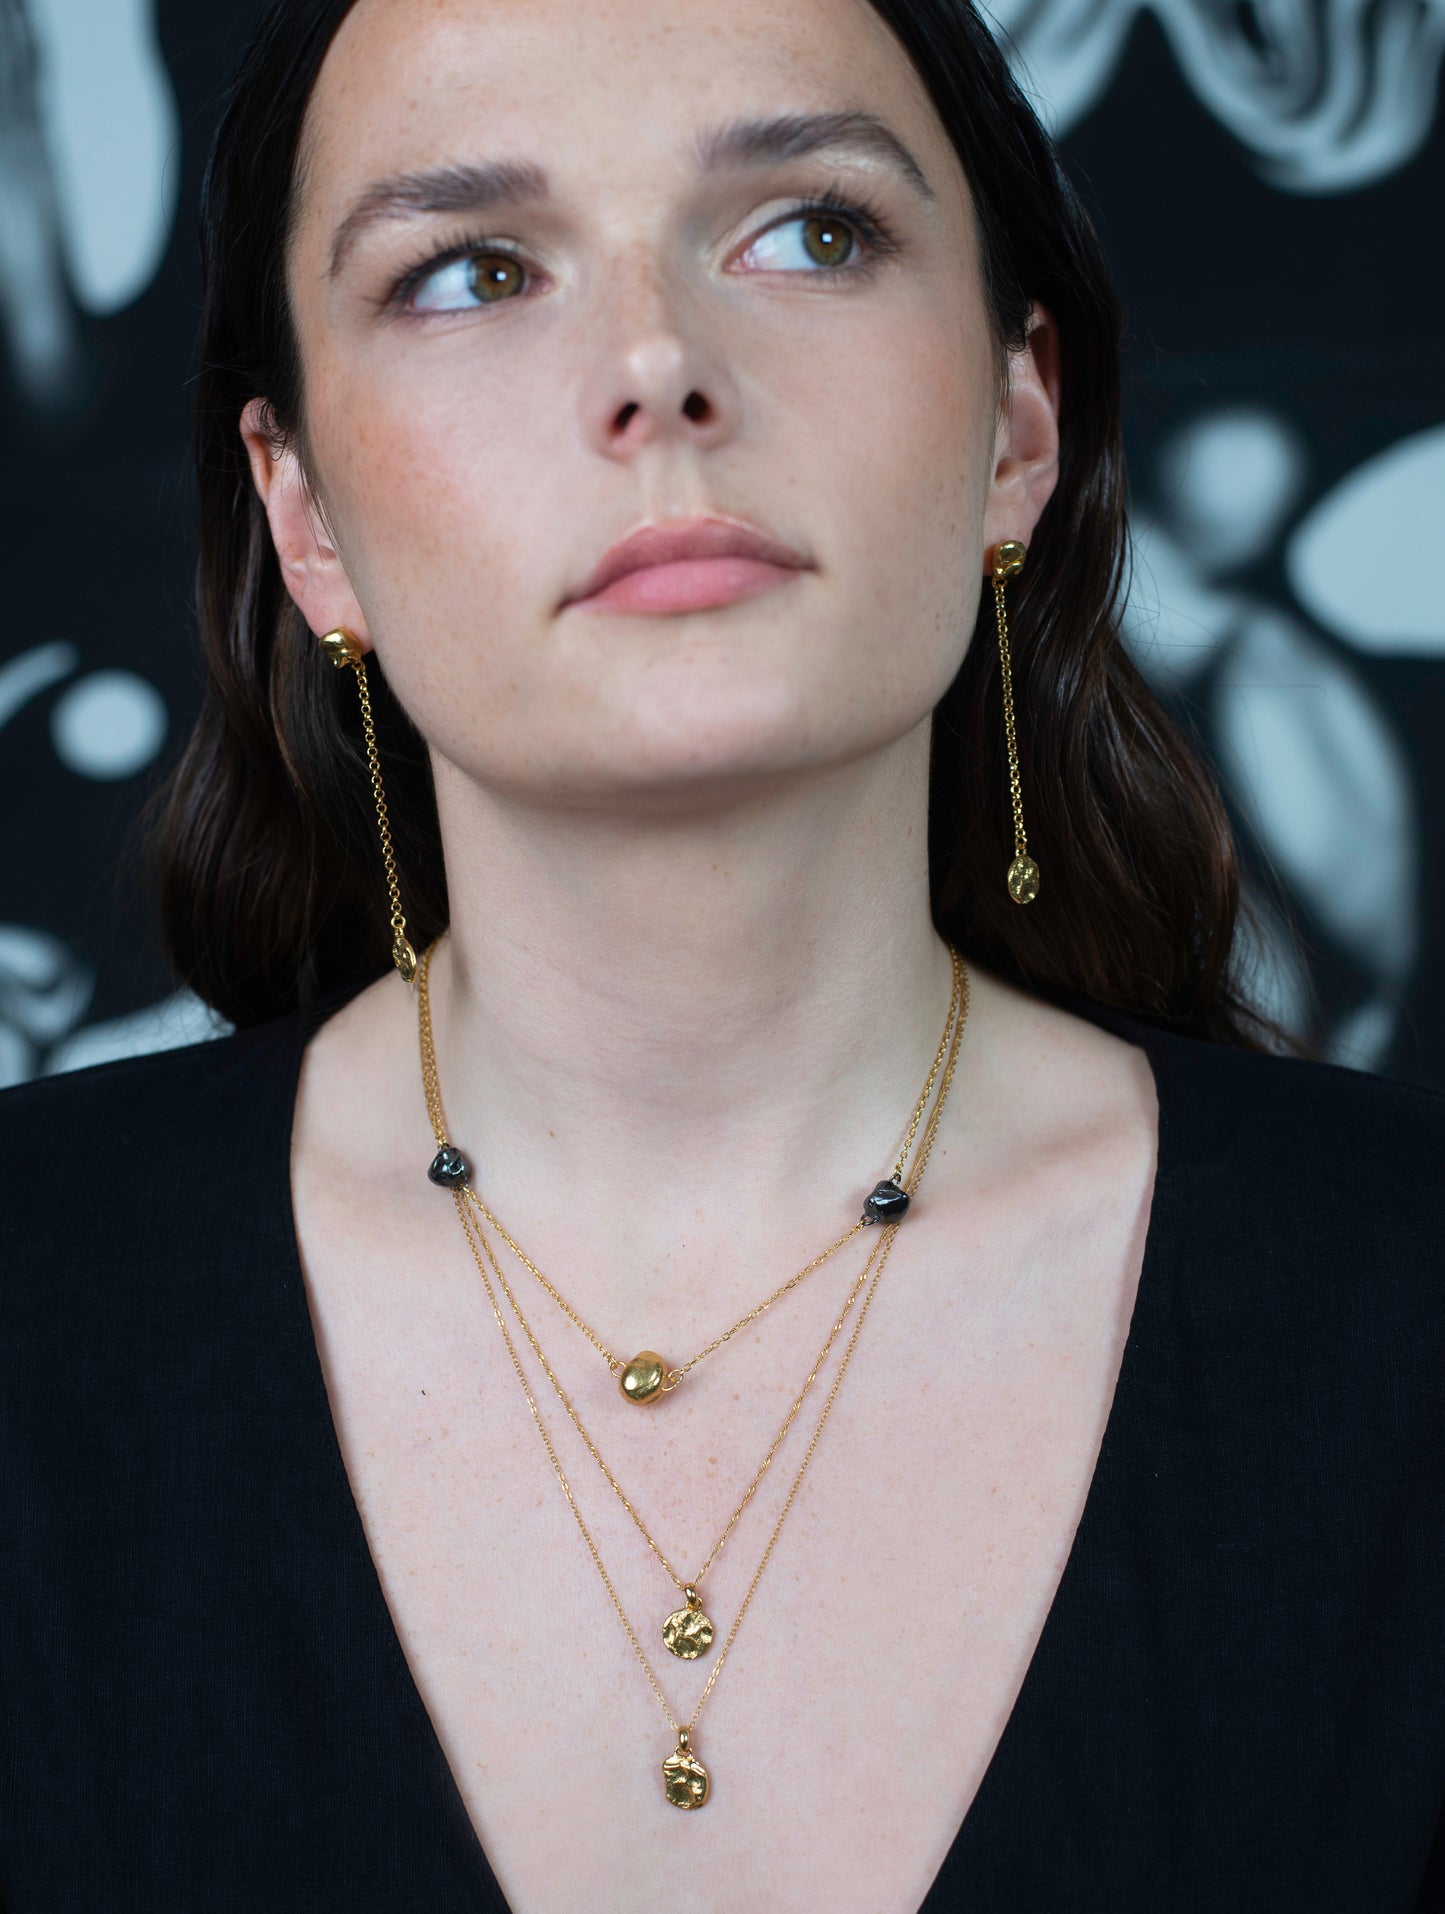 Model wearing drop earrings with layered necklaces